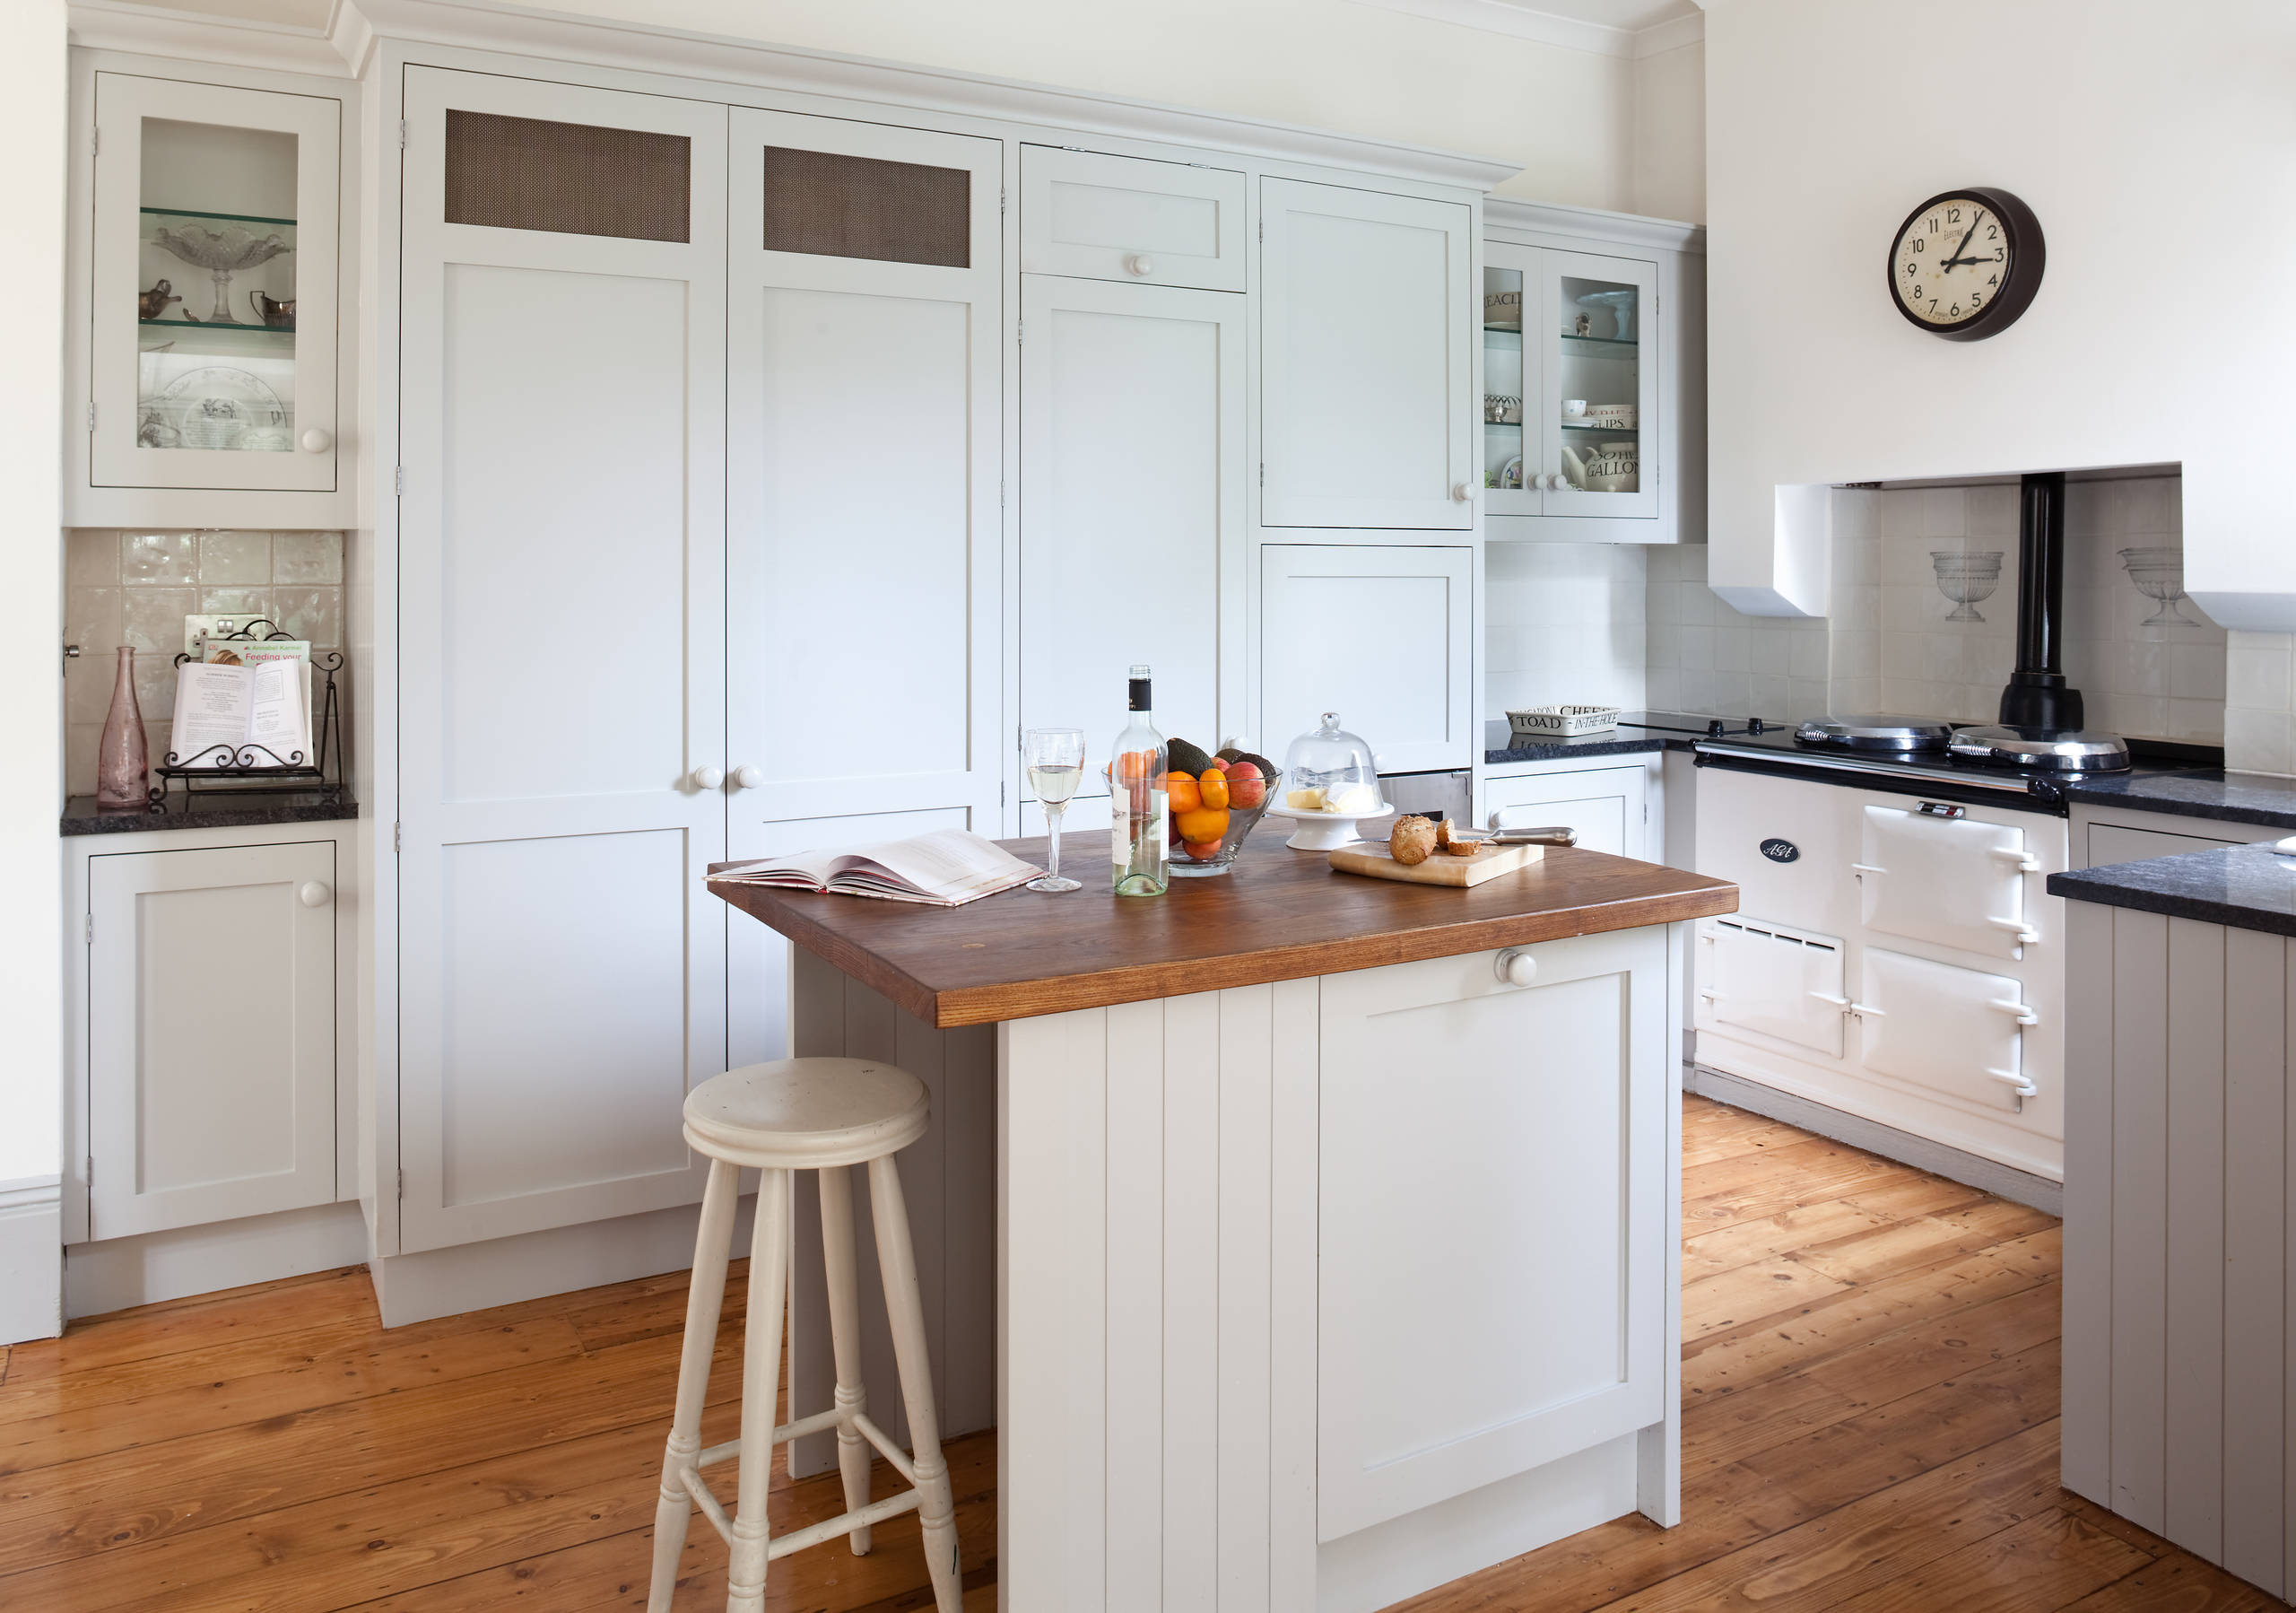 small kitchen island ideas for every space and budget | houzz uk